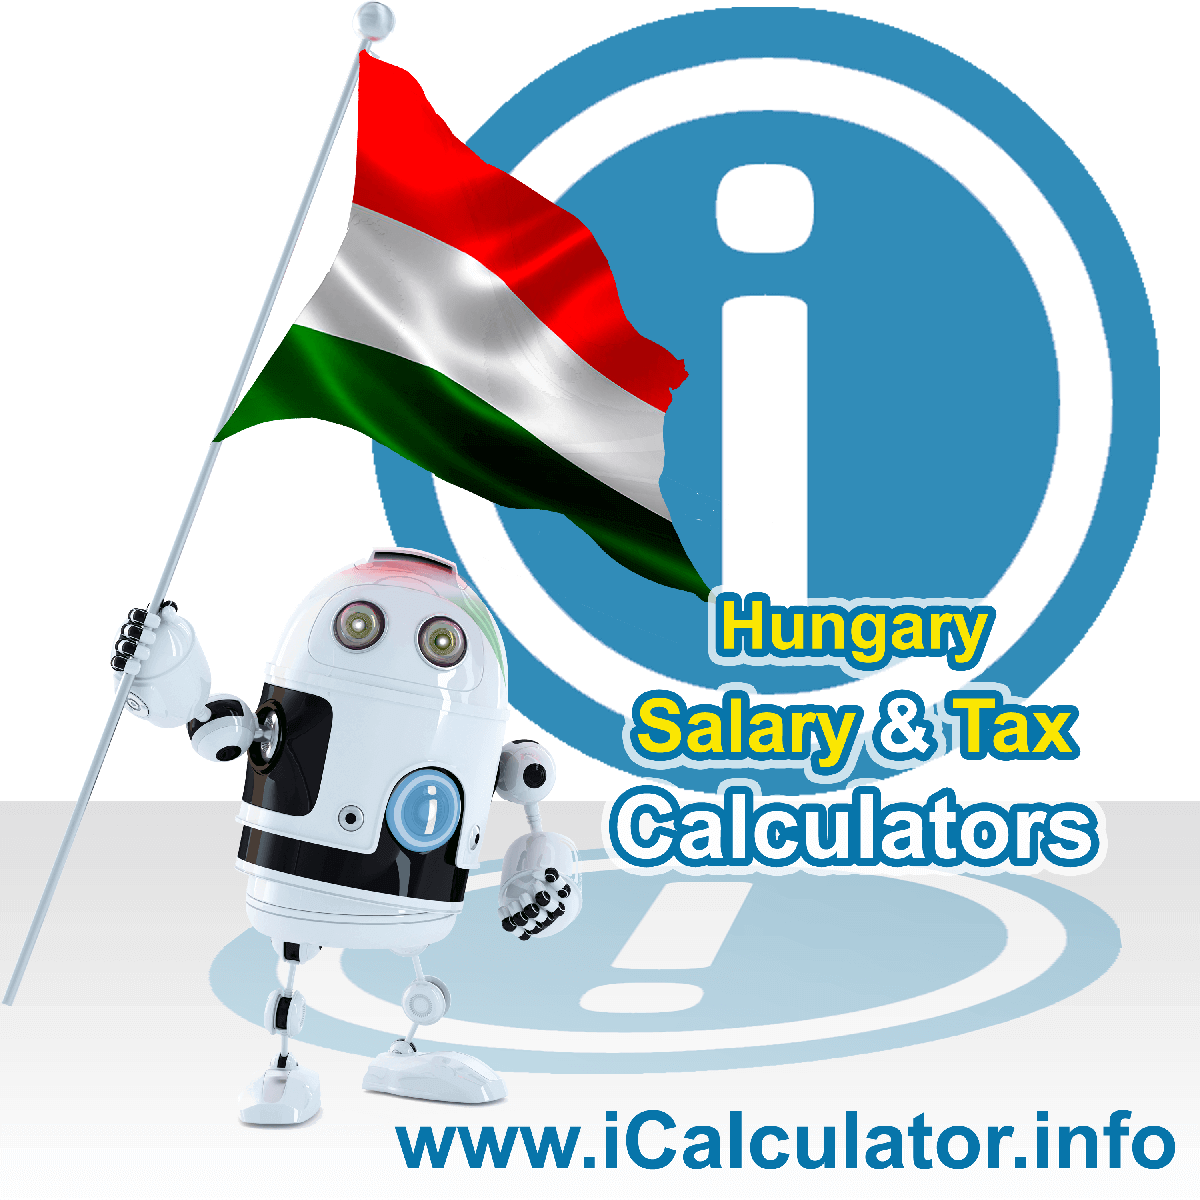 Hungary Tax Calculator. This image shows the Hungary flag and information relating to the tax formula for the Hungary Salary Calculator